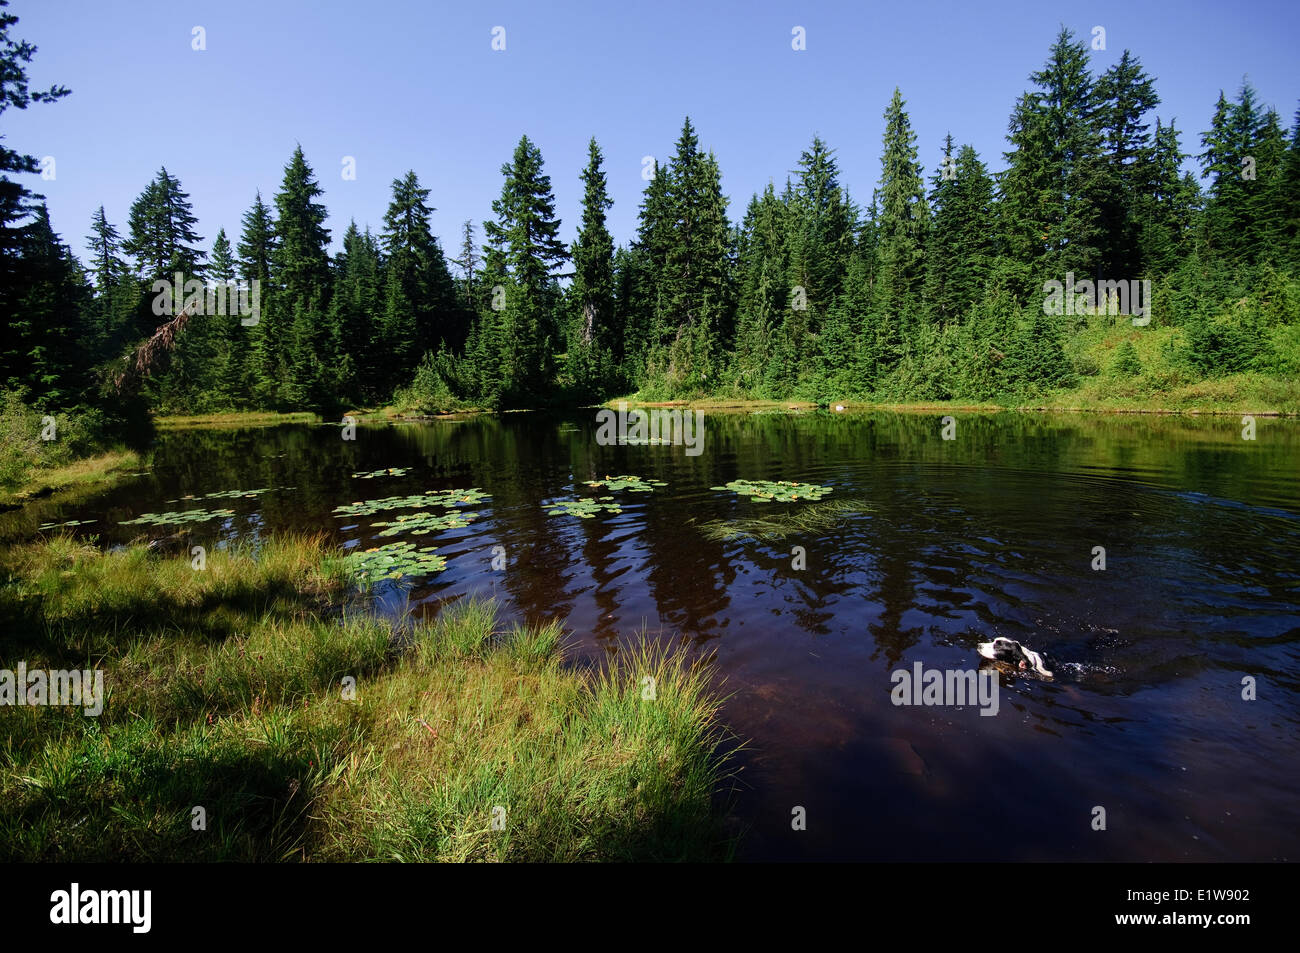 Dog swimming in the Hollyburn Lakes area. Hollyburn Mountain, West Vancouver, British Columbia. Canada Stock Photo